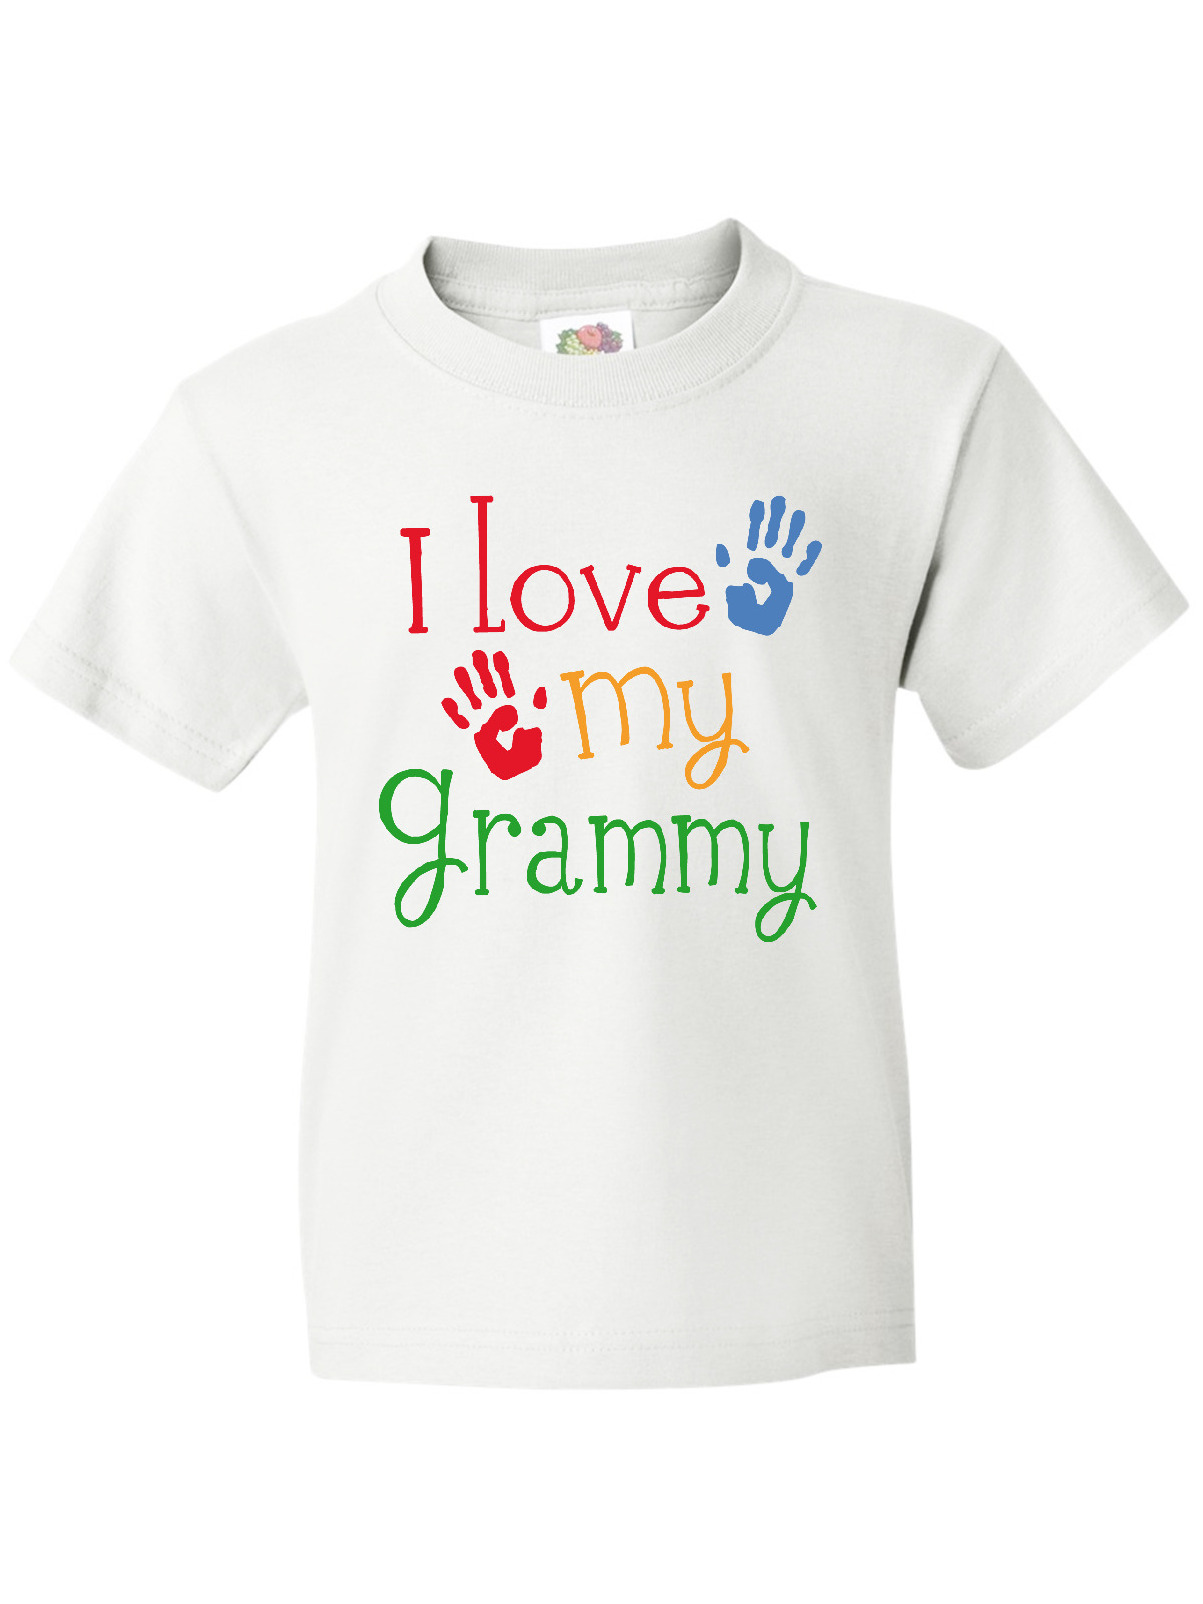 Inktastic I Love My Grammy Youth T-Shirt - image 1 of 4